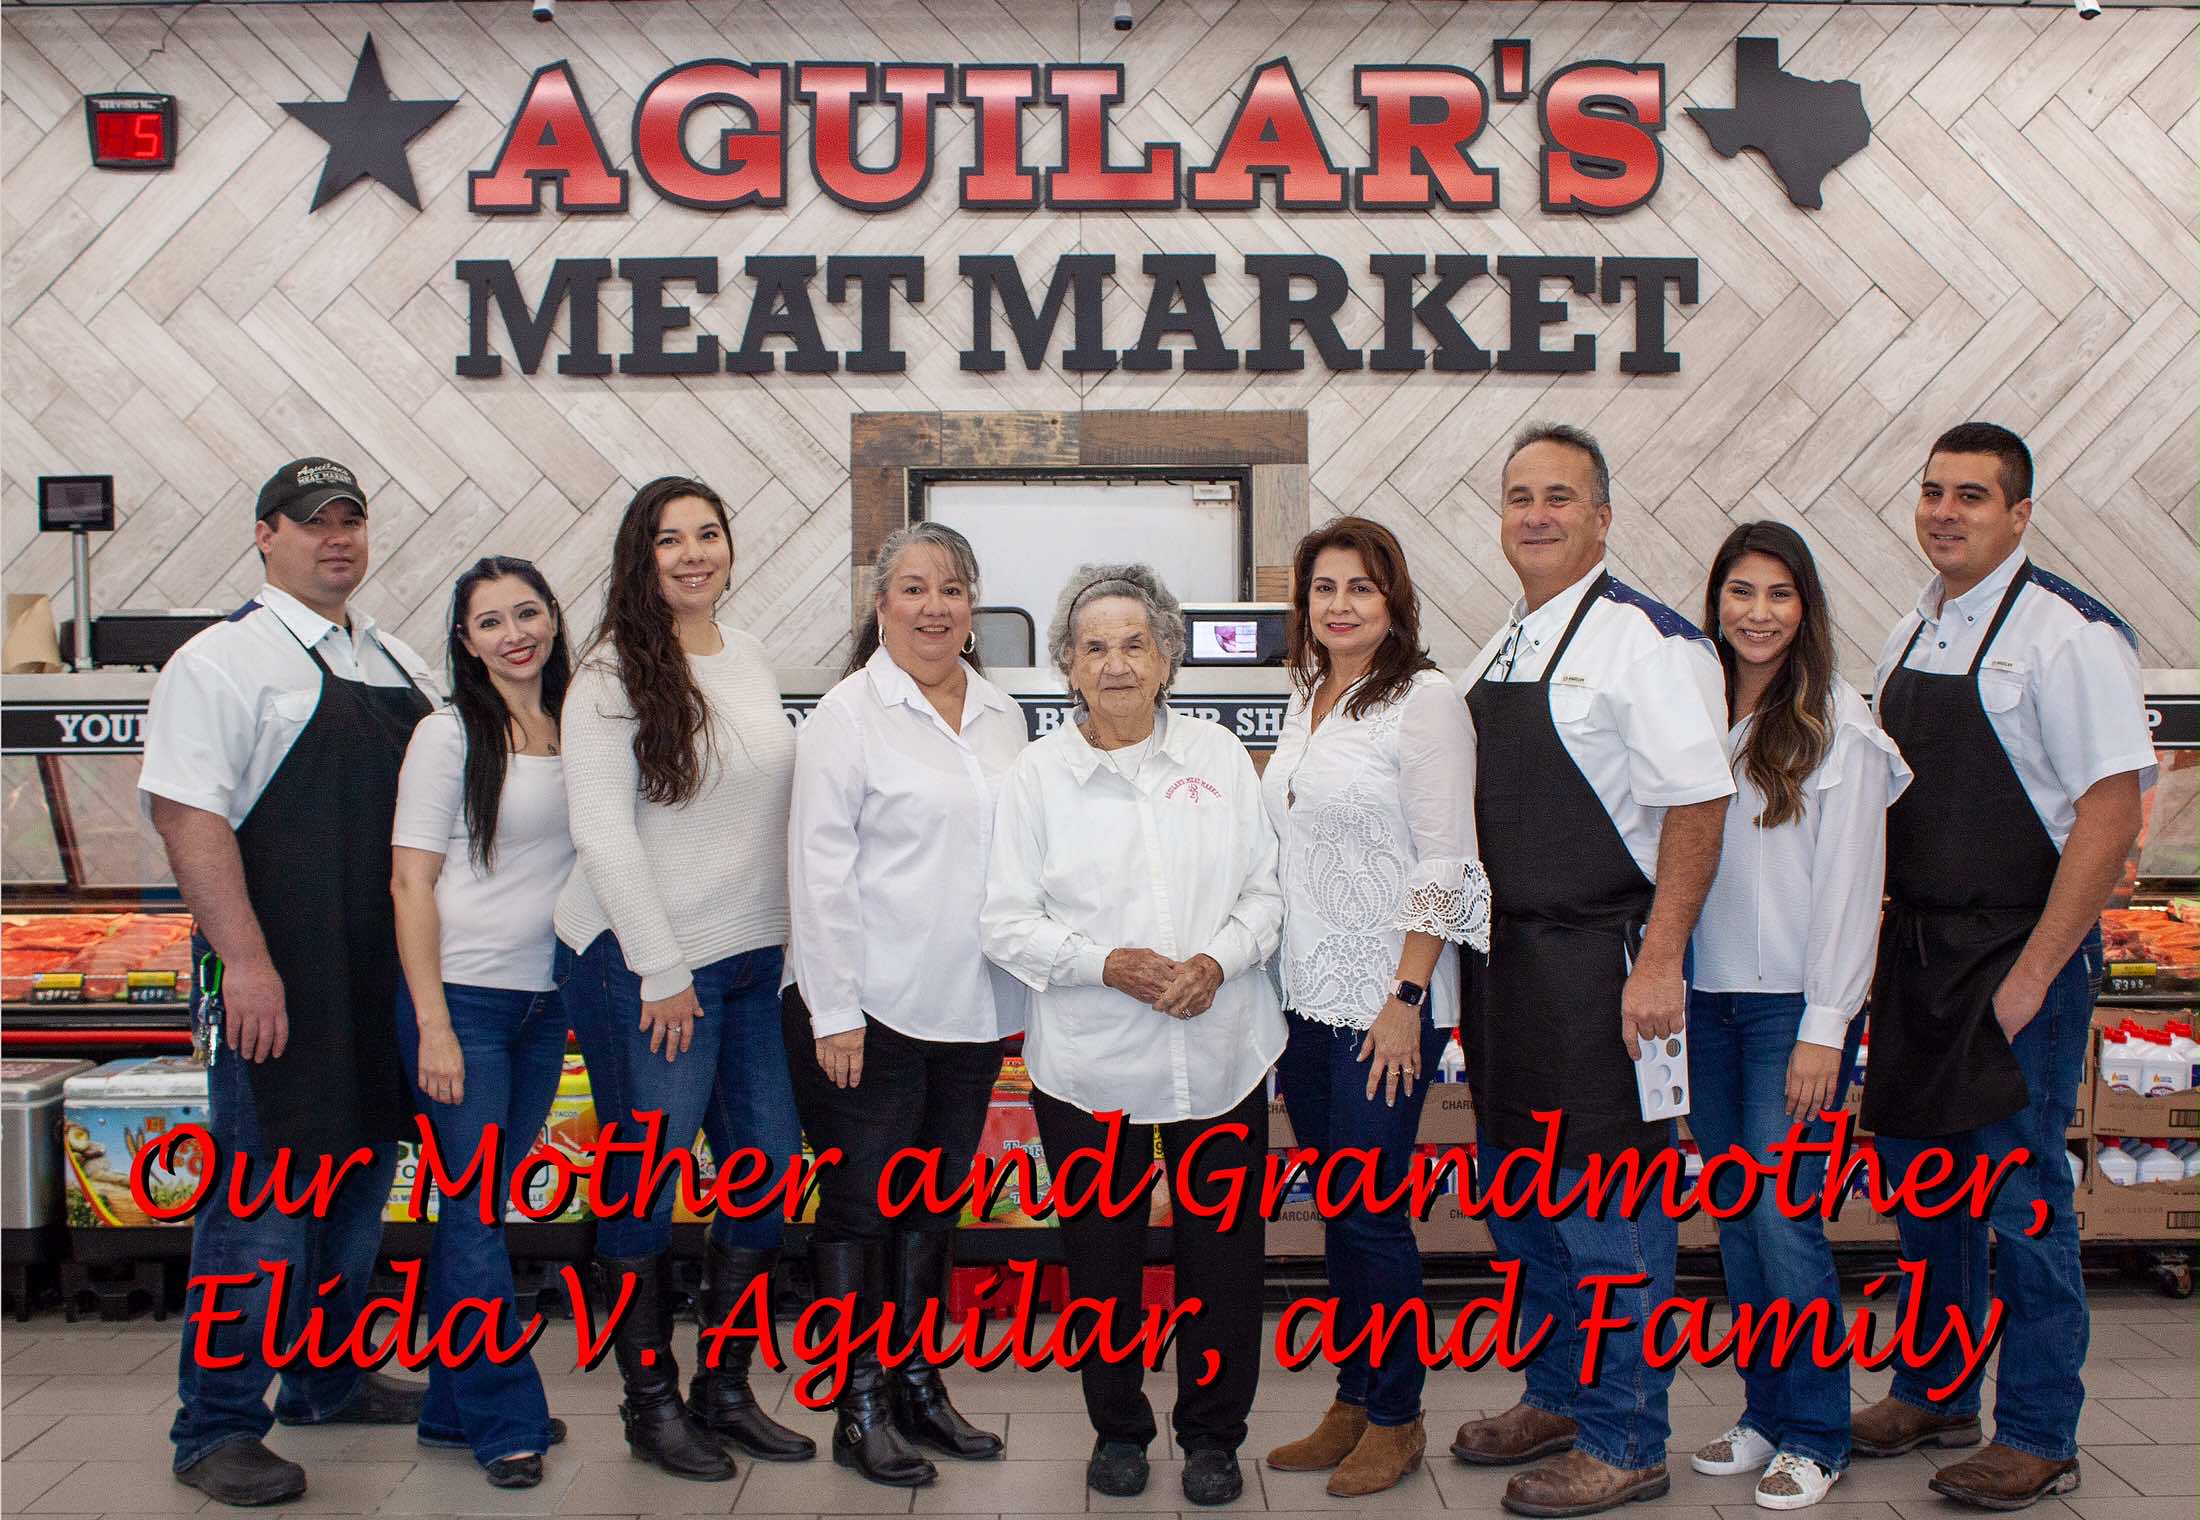 The Aguilar Family